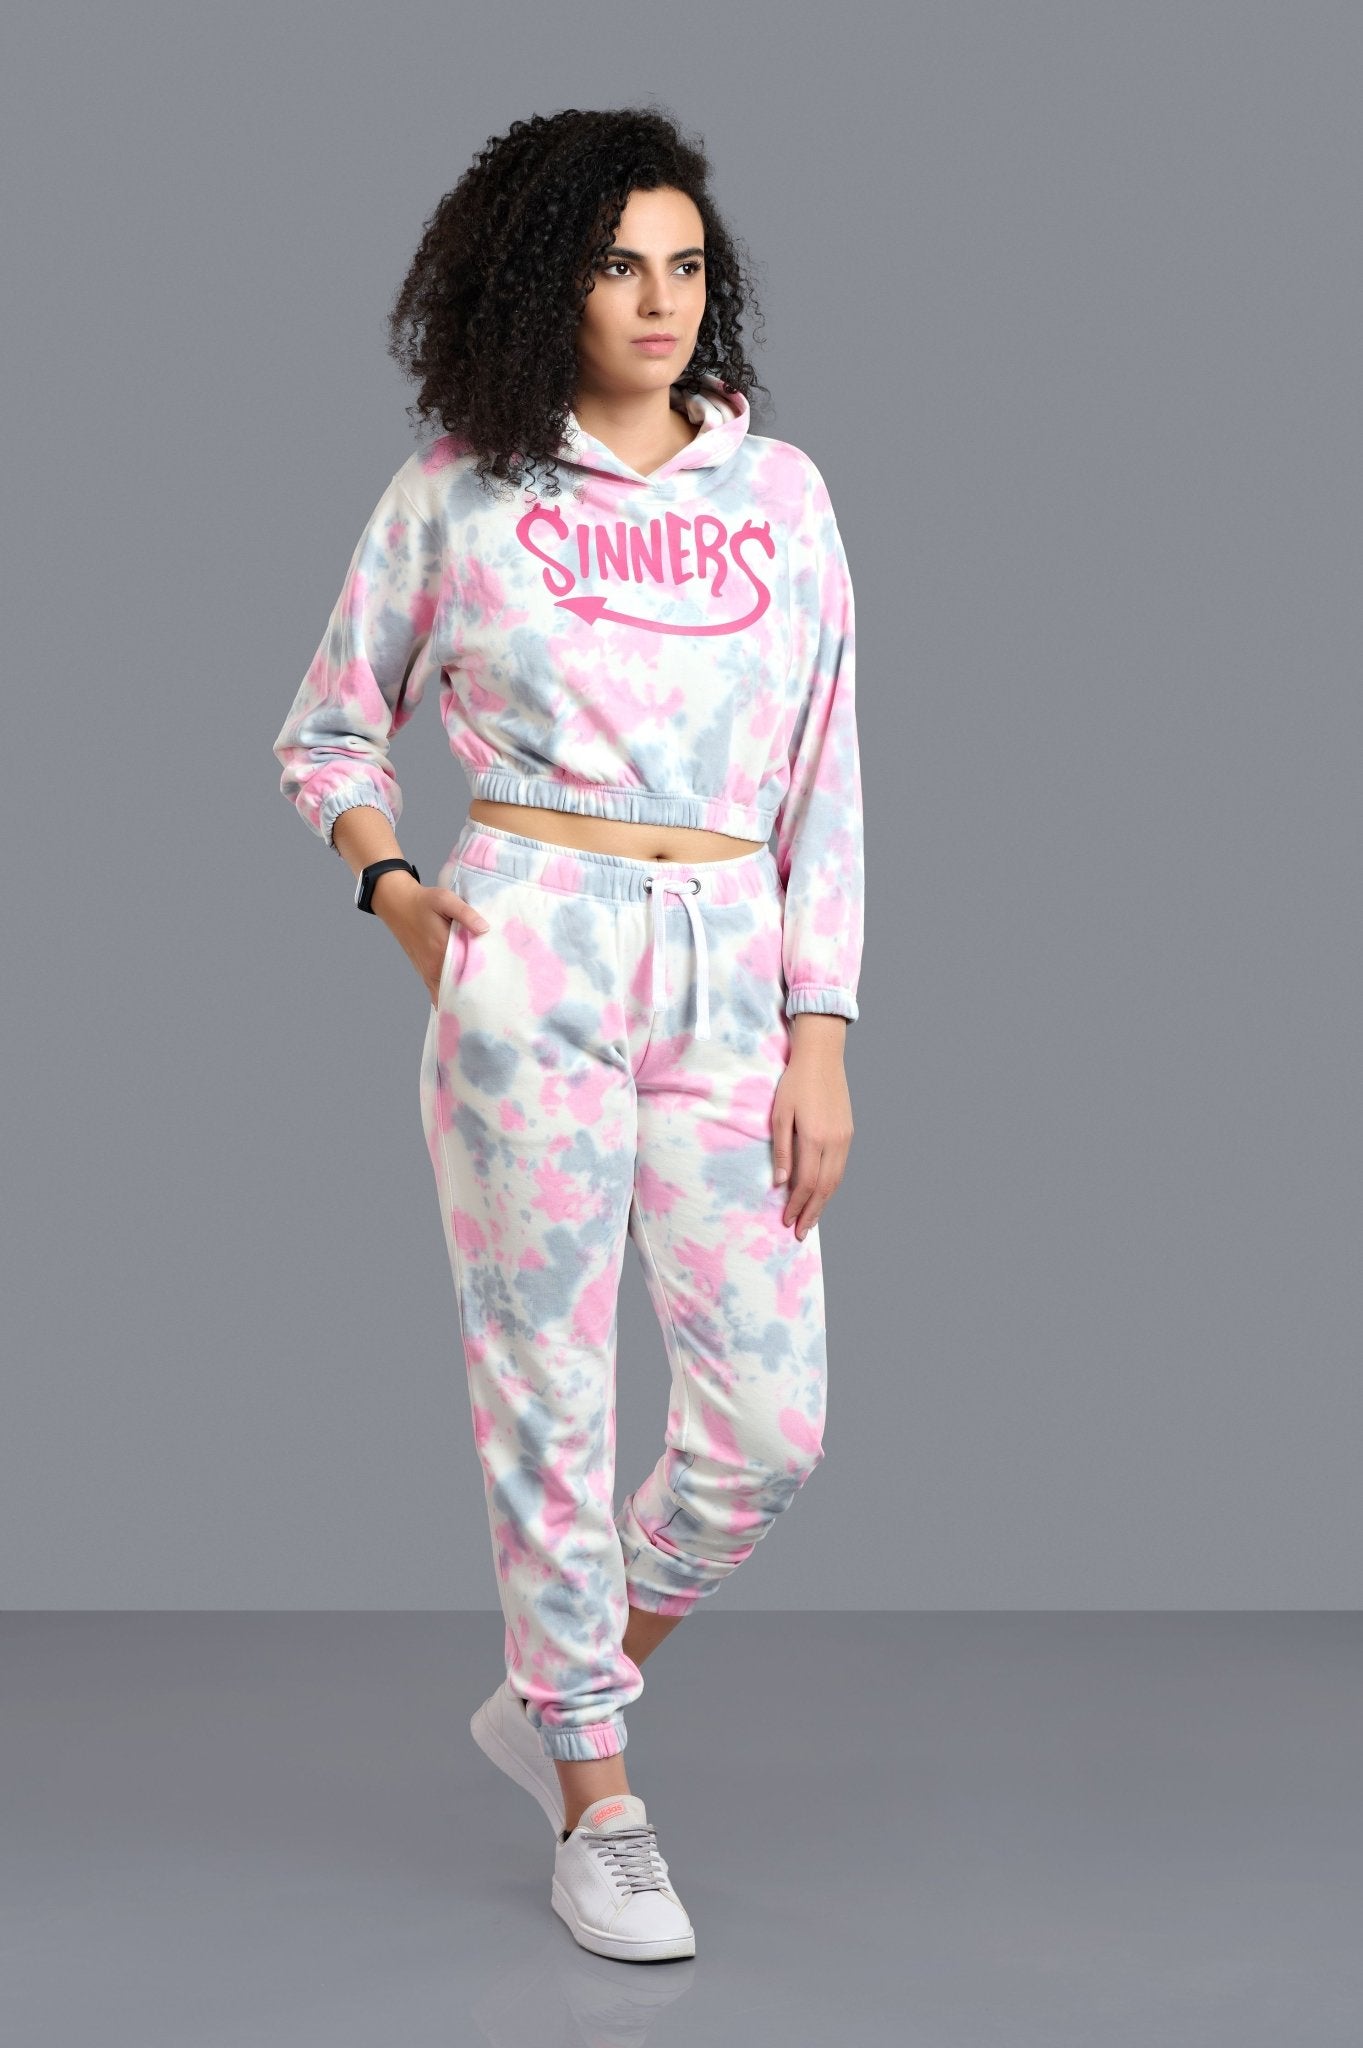 Sinners Printed Multi-color Co-ord Set for Women - Go Devil